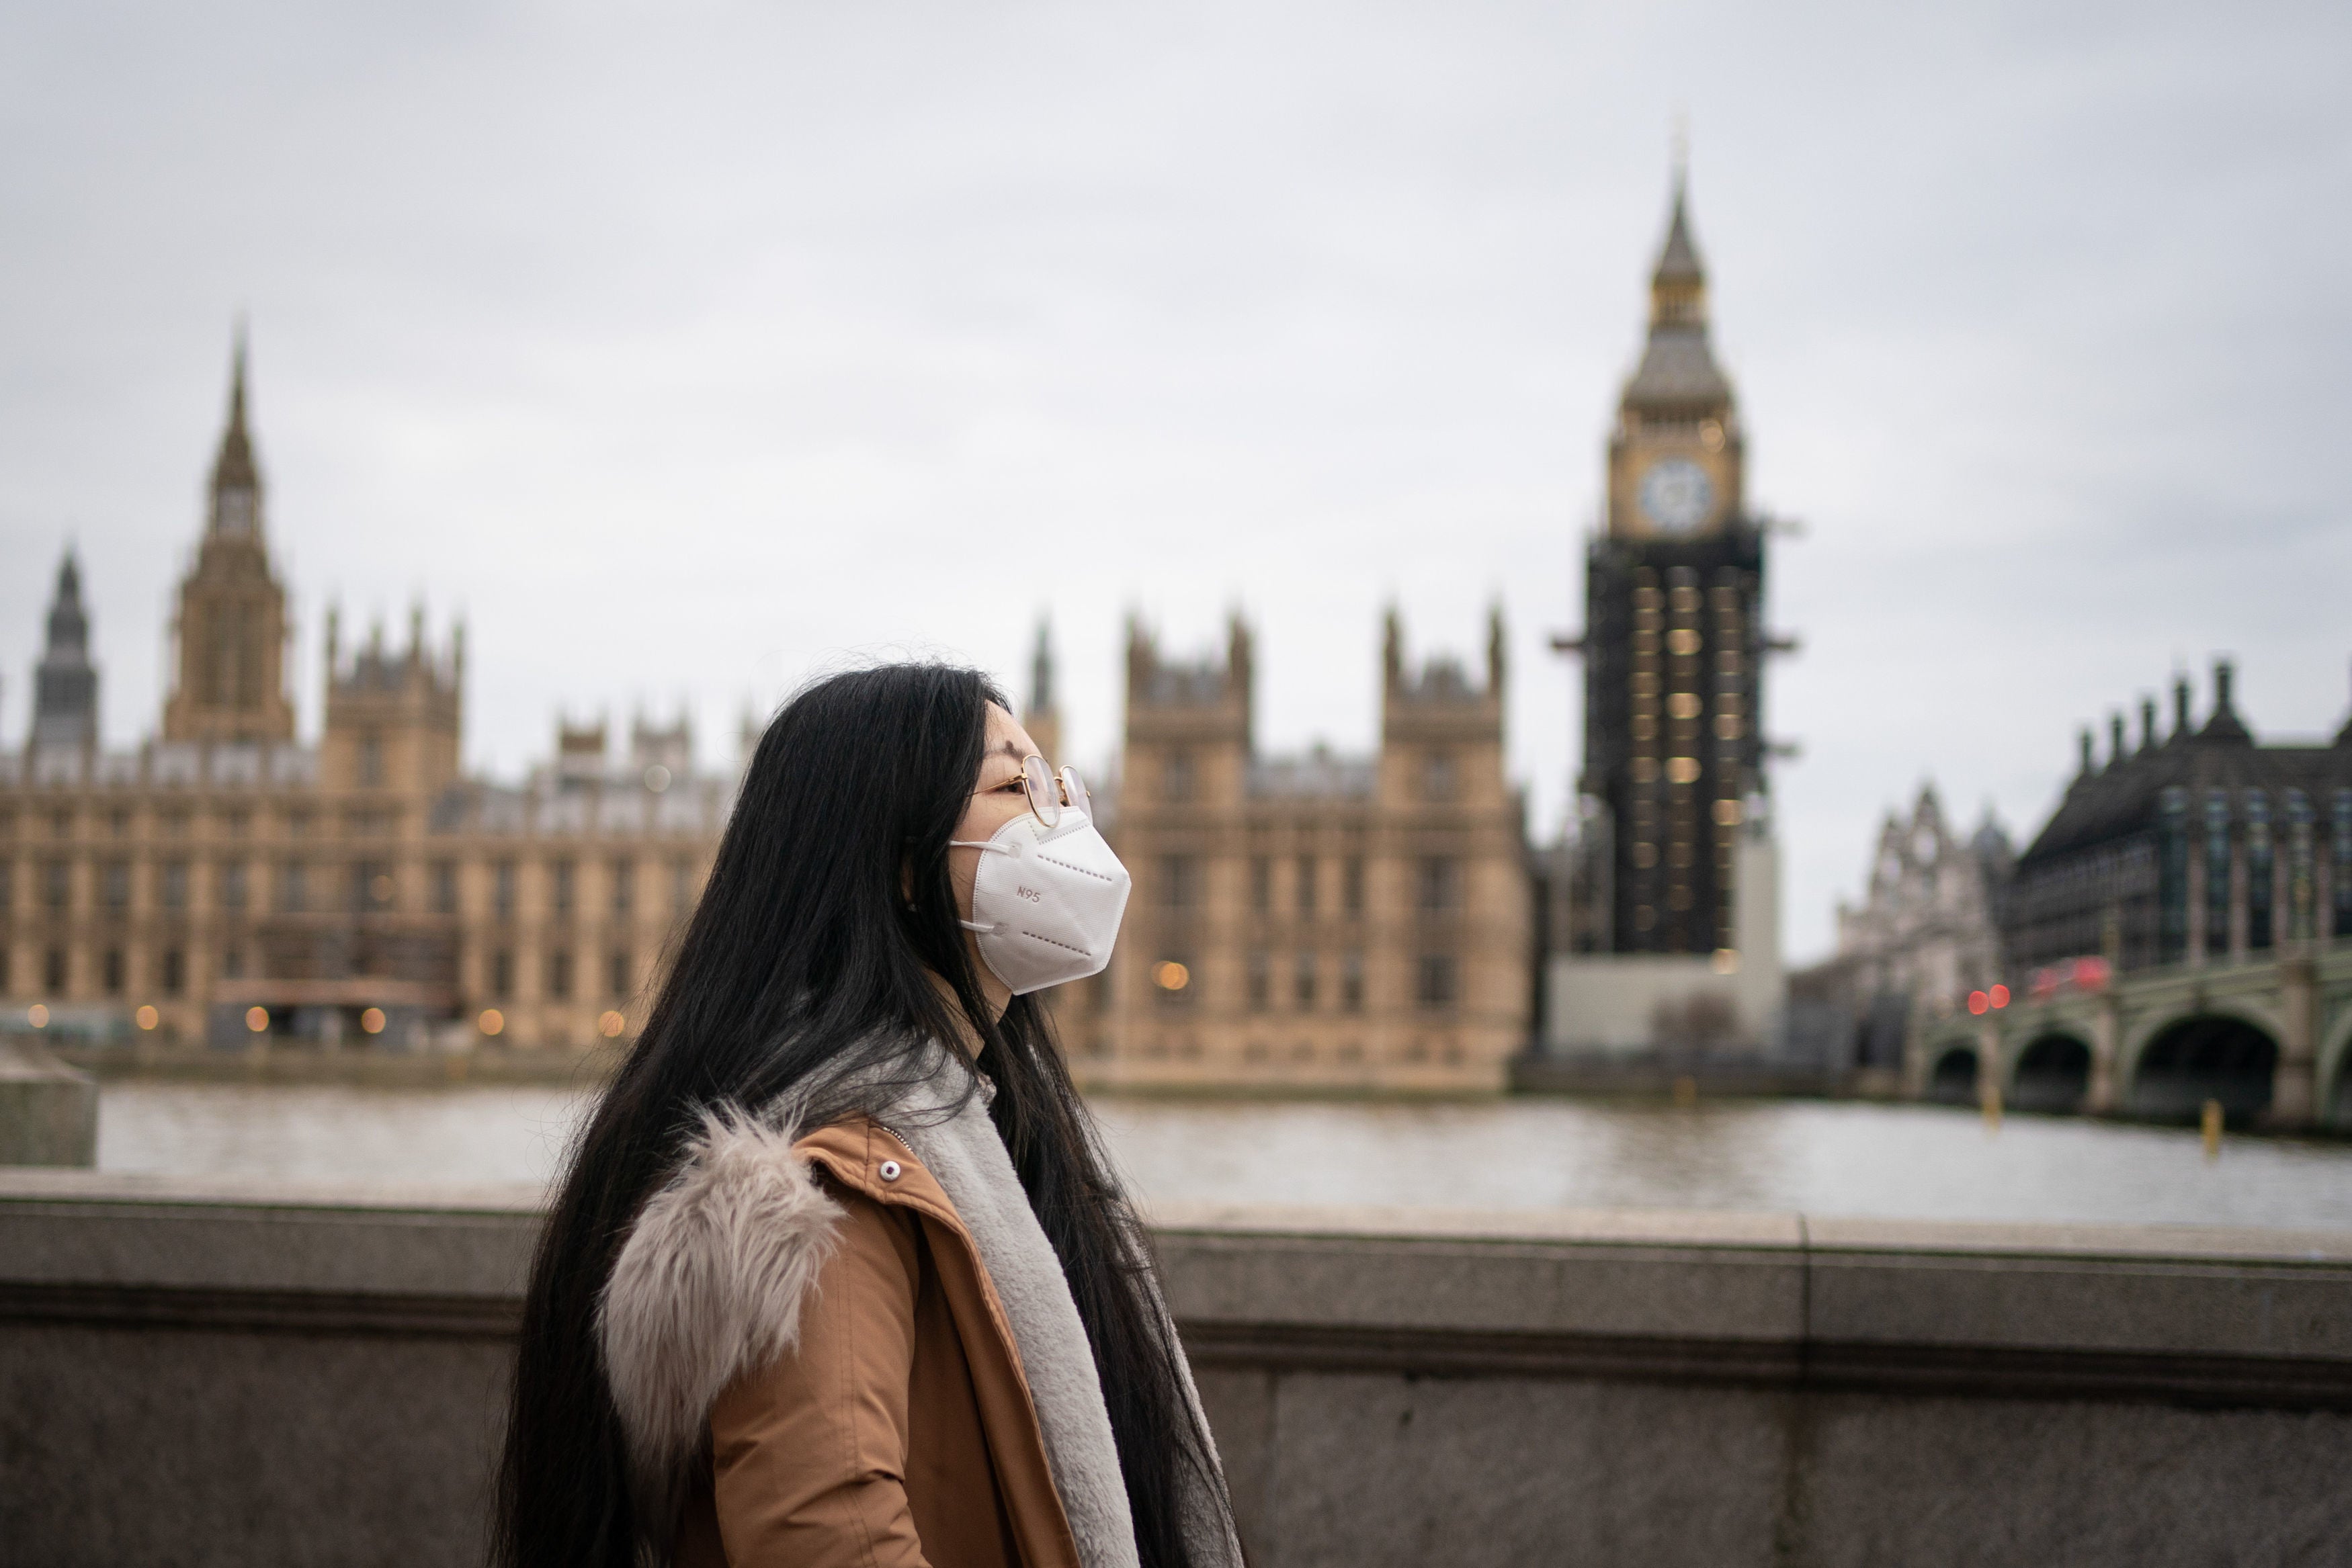 A woman wearing a face mask walking near the Houses of Parliament